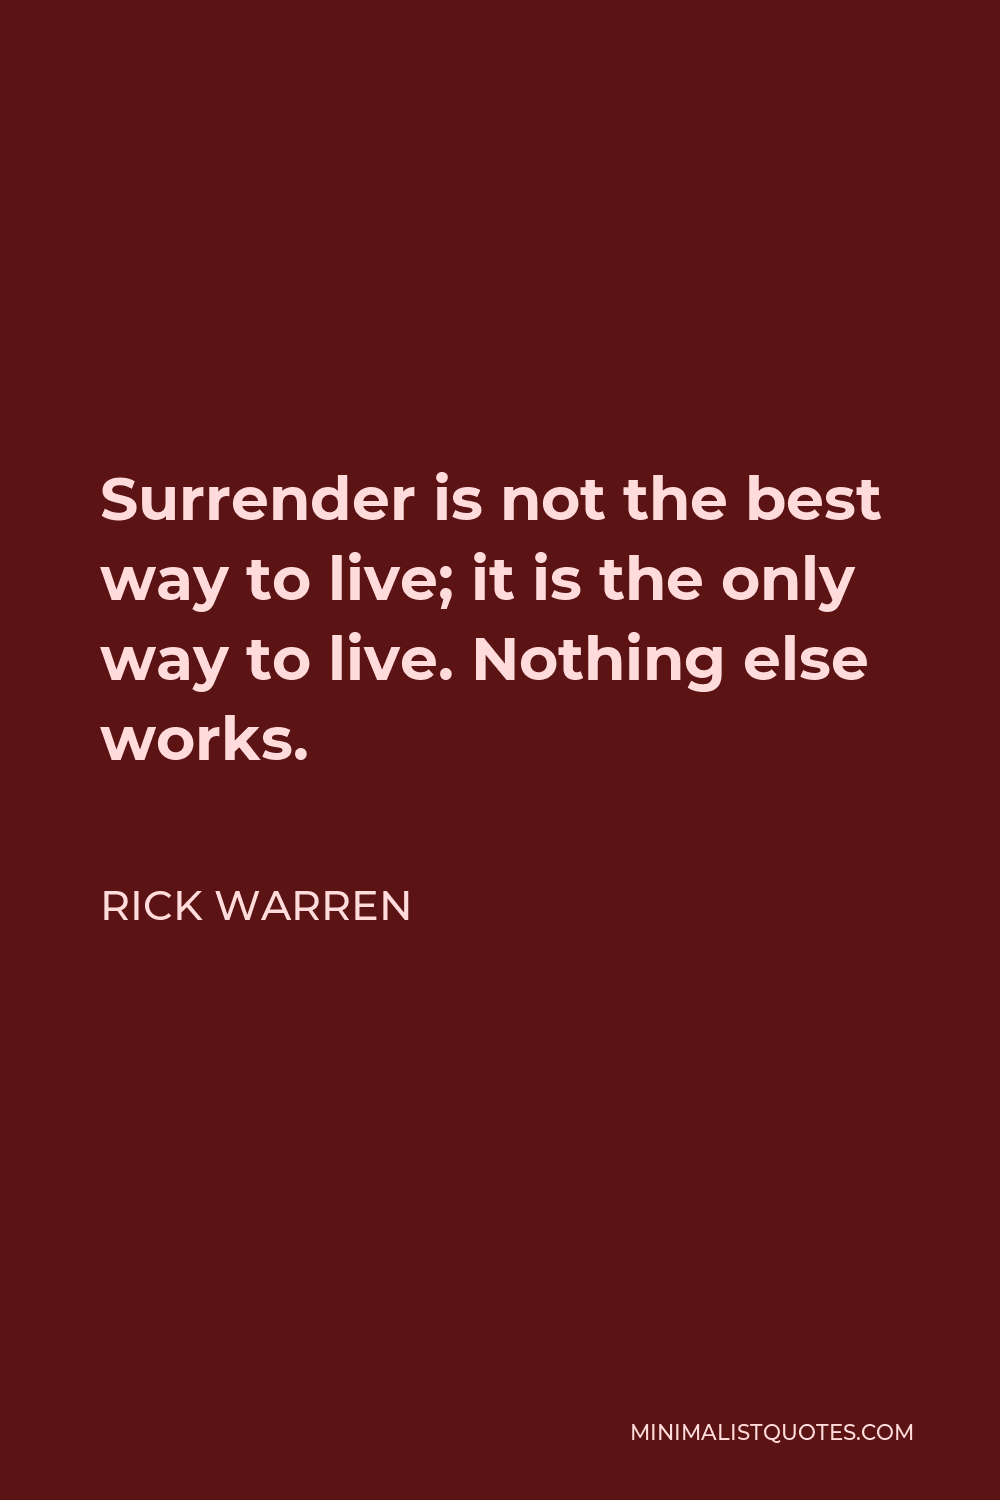 Rick Warren Quote - Surrender is not the best way to live; it is the only way to live. Nothing else works.